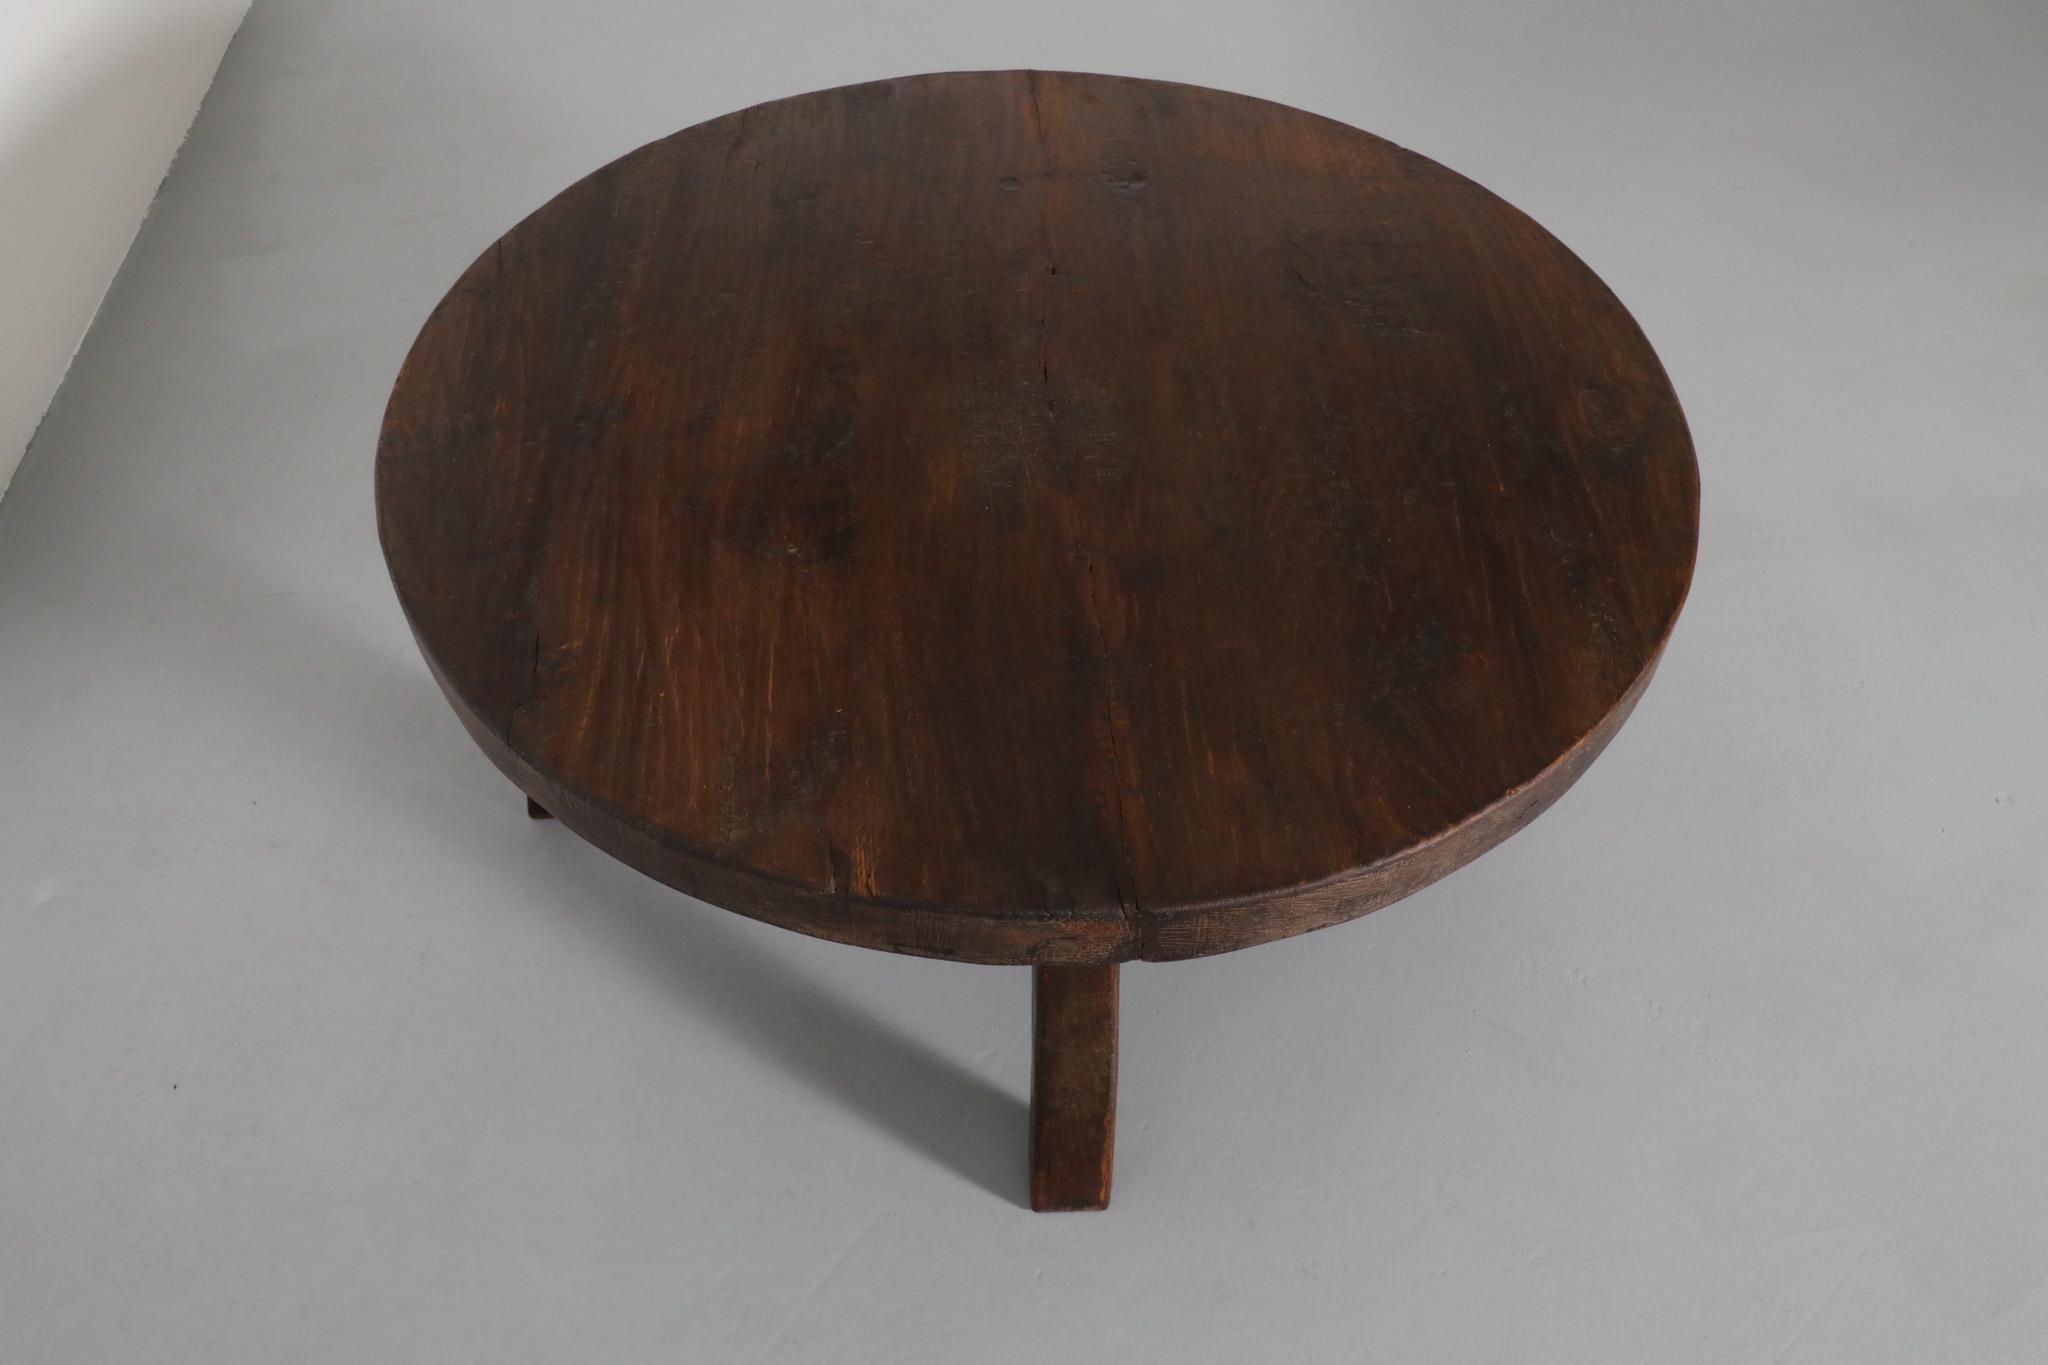 Pierre Chapo Style Brutalist Oak Coffee Table with Curved Legs For Sale 3